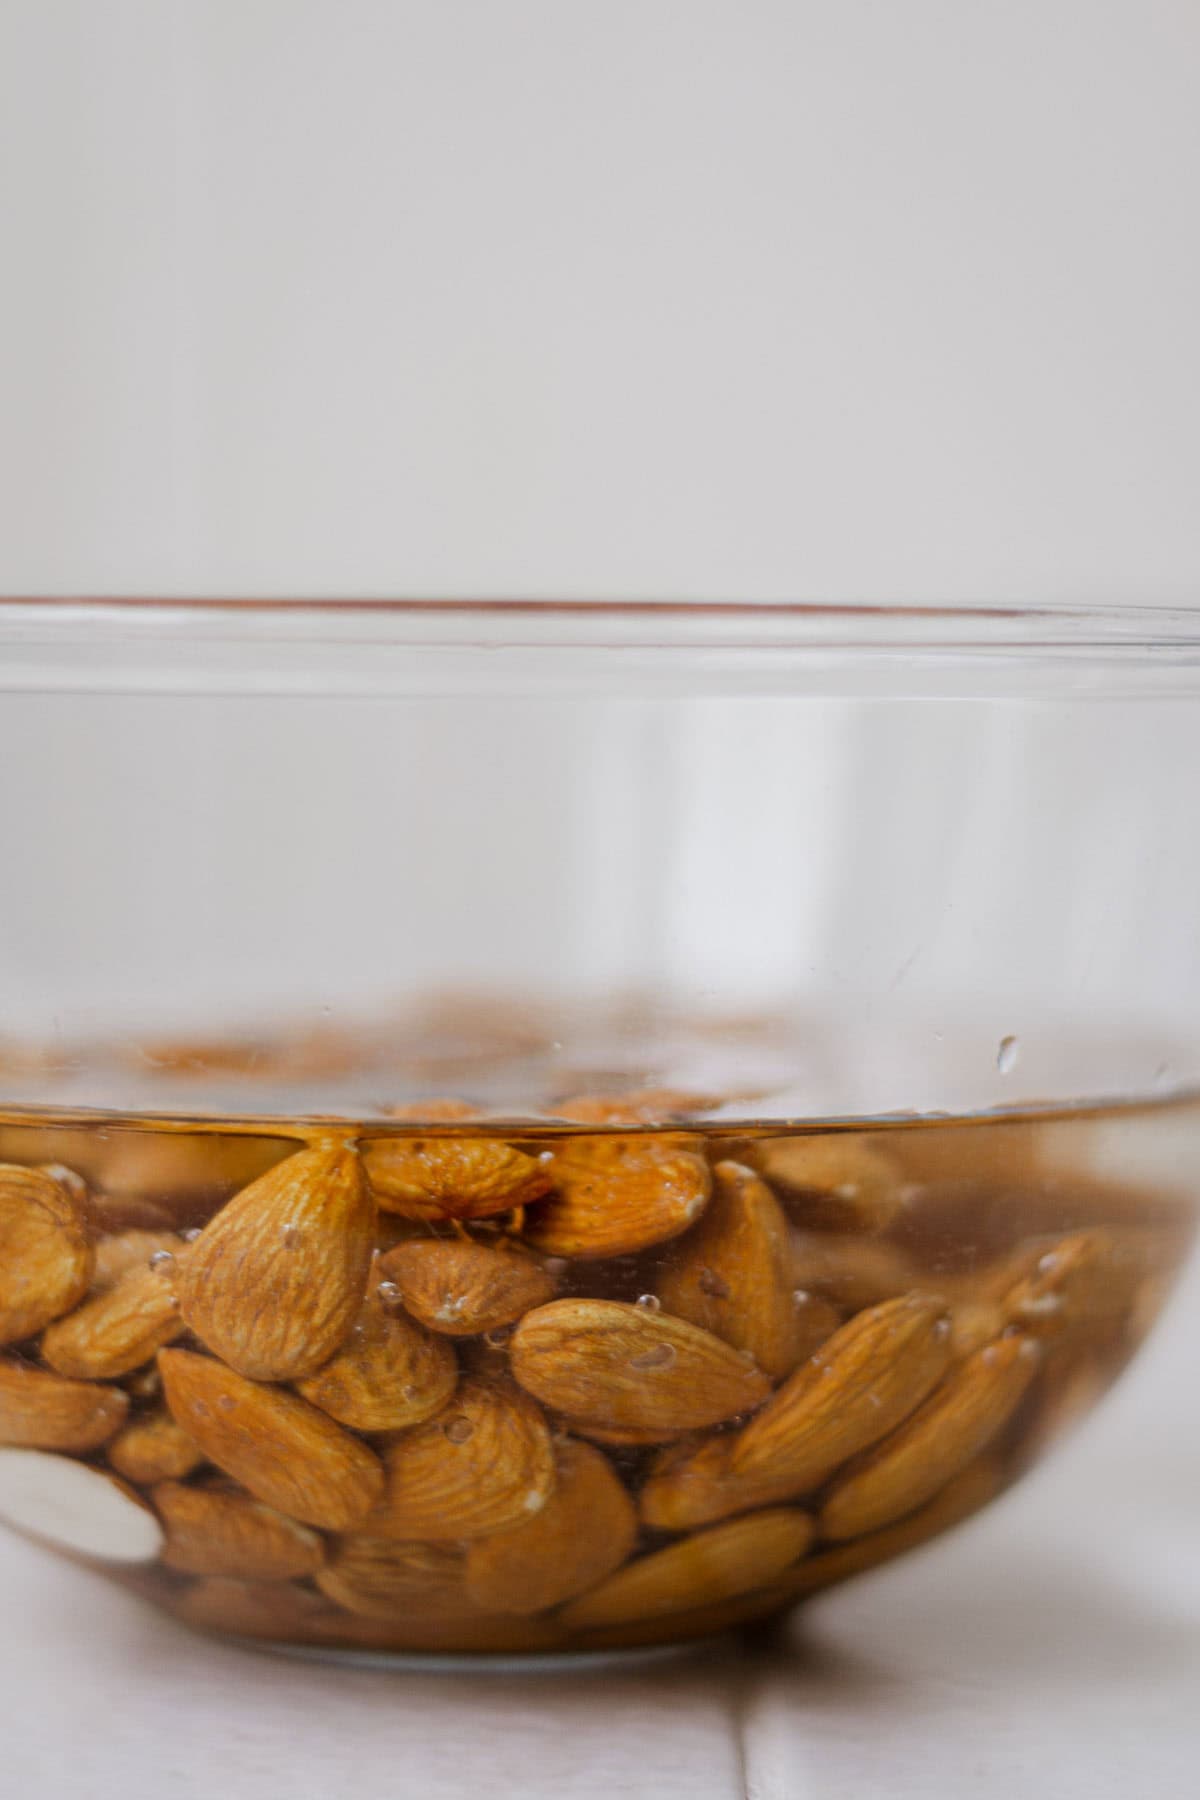 Close up of almonds submerged in vinegar.